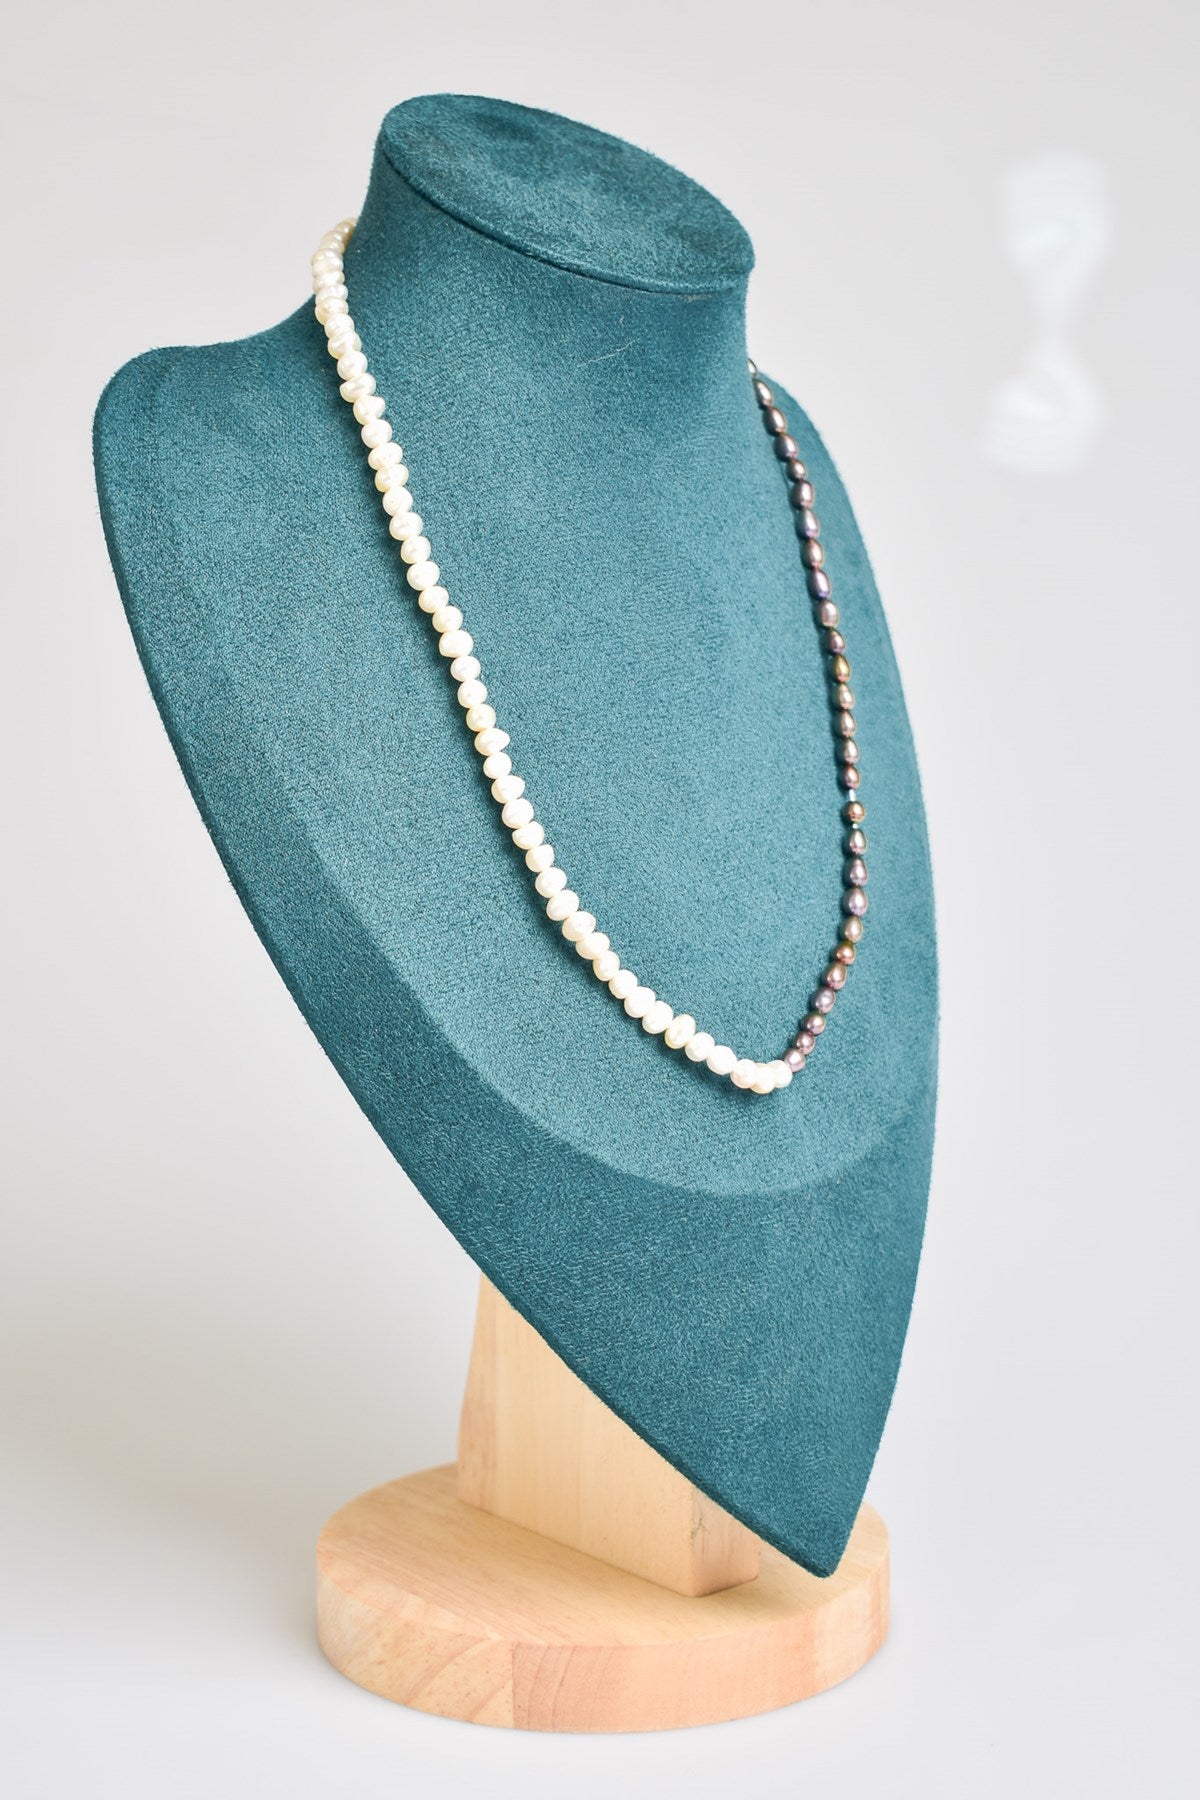 Black / White Ocean Pearl Necklace